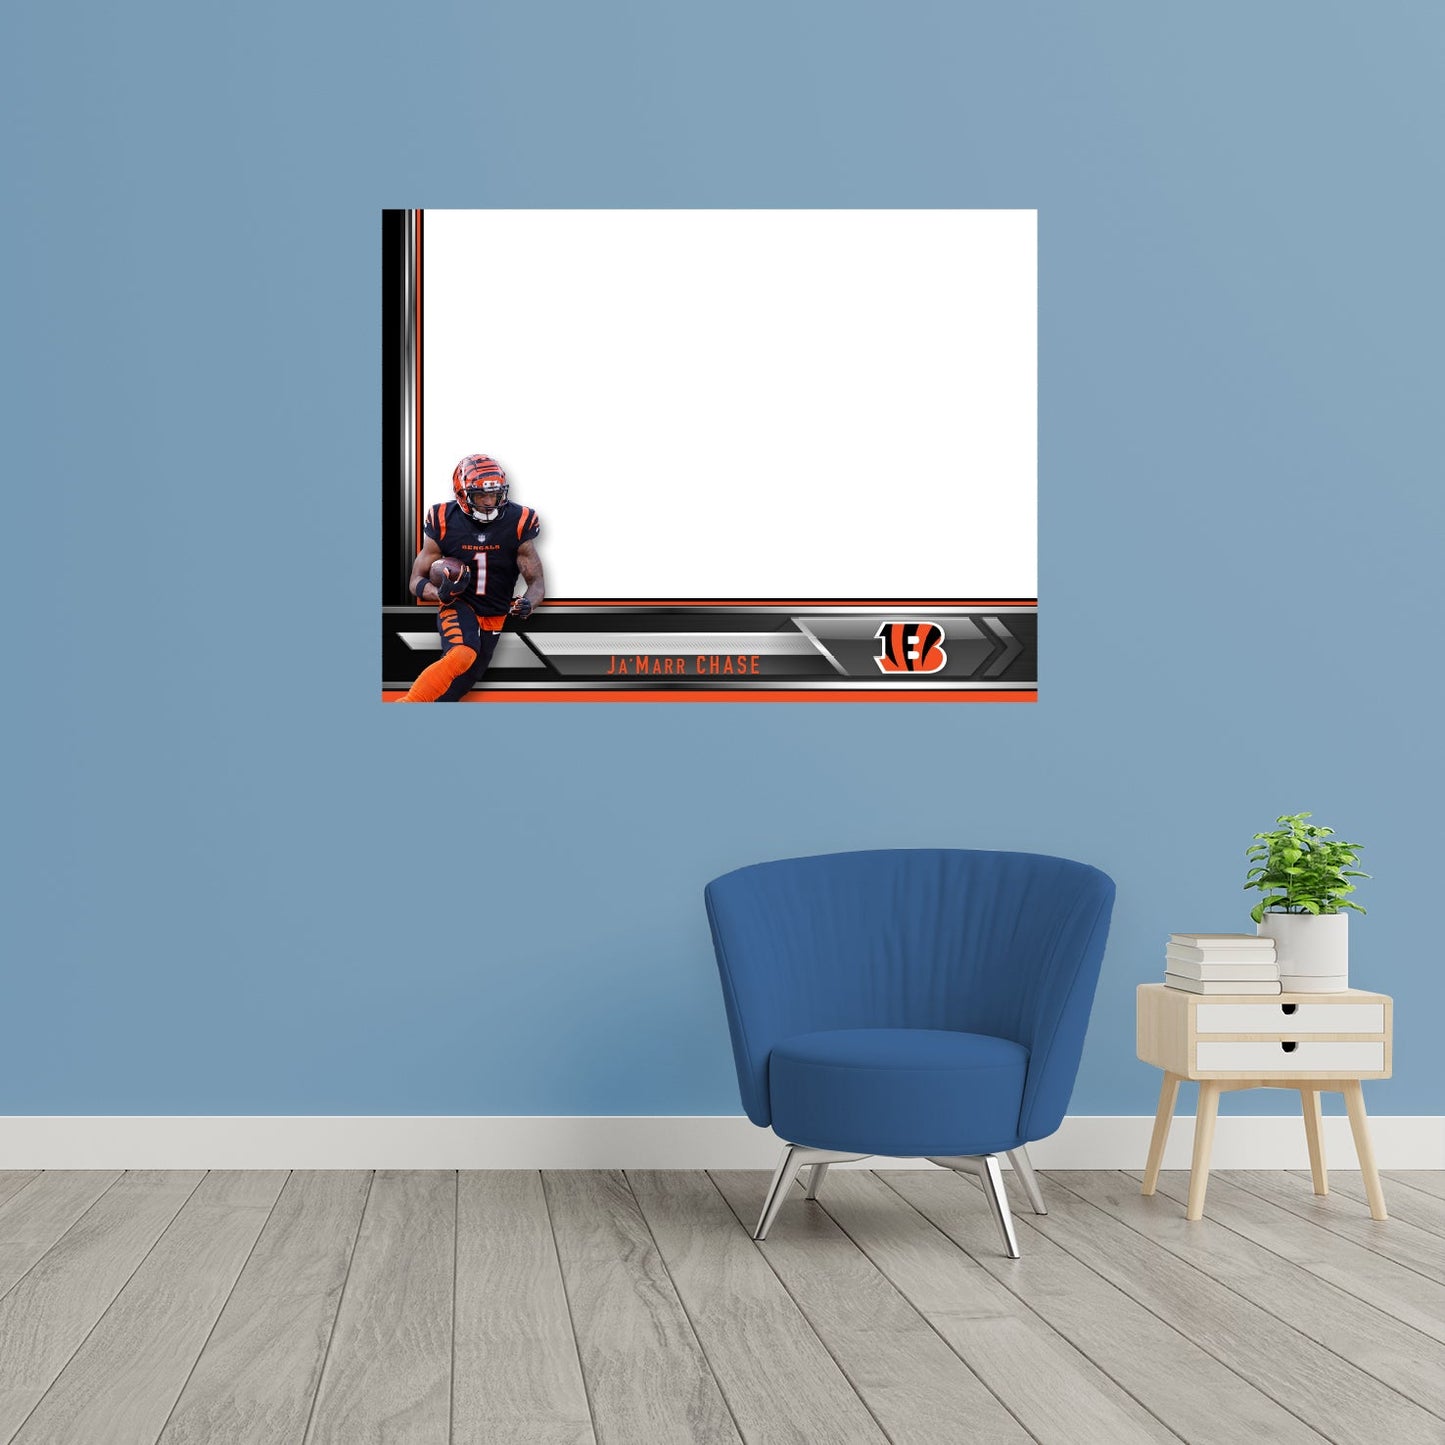 Cincinnati Bengals: Ja'Marr Chase Dry Erase Whiteboard - Officially Licensed NFL Removable Adhesive Decal